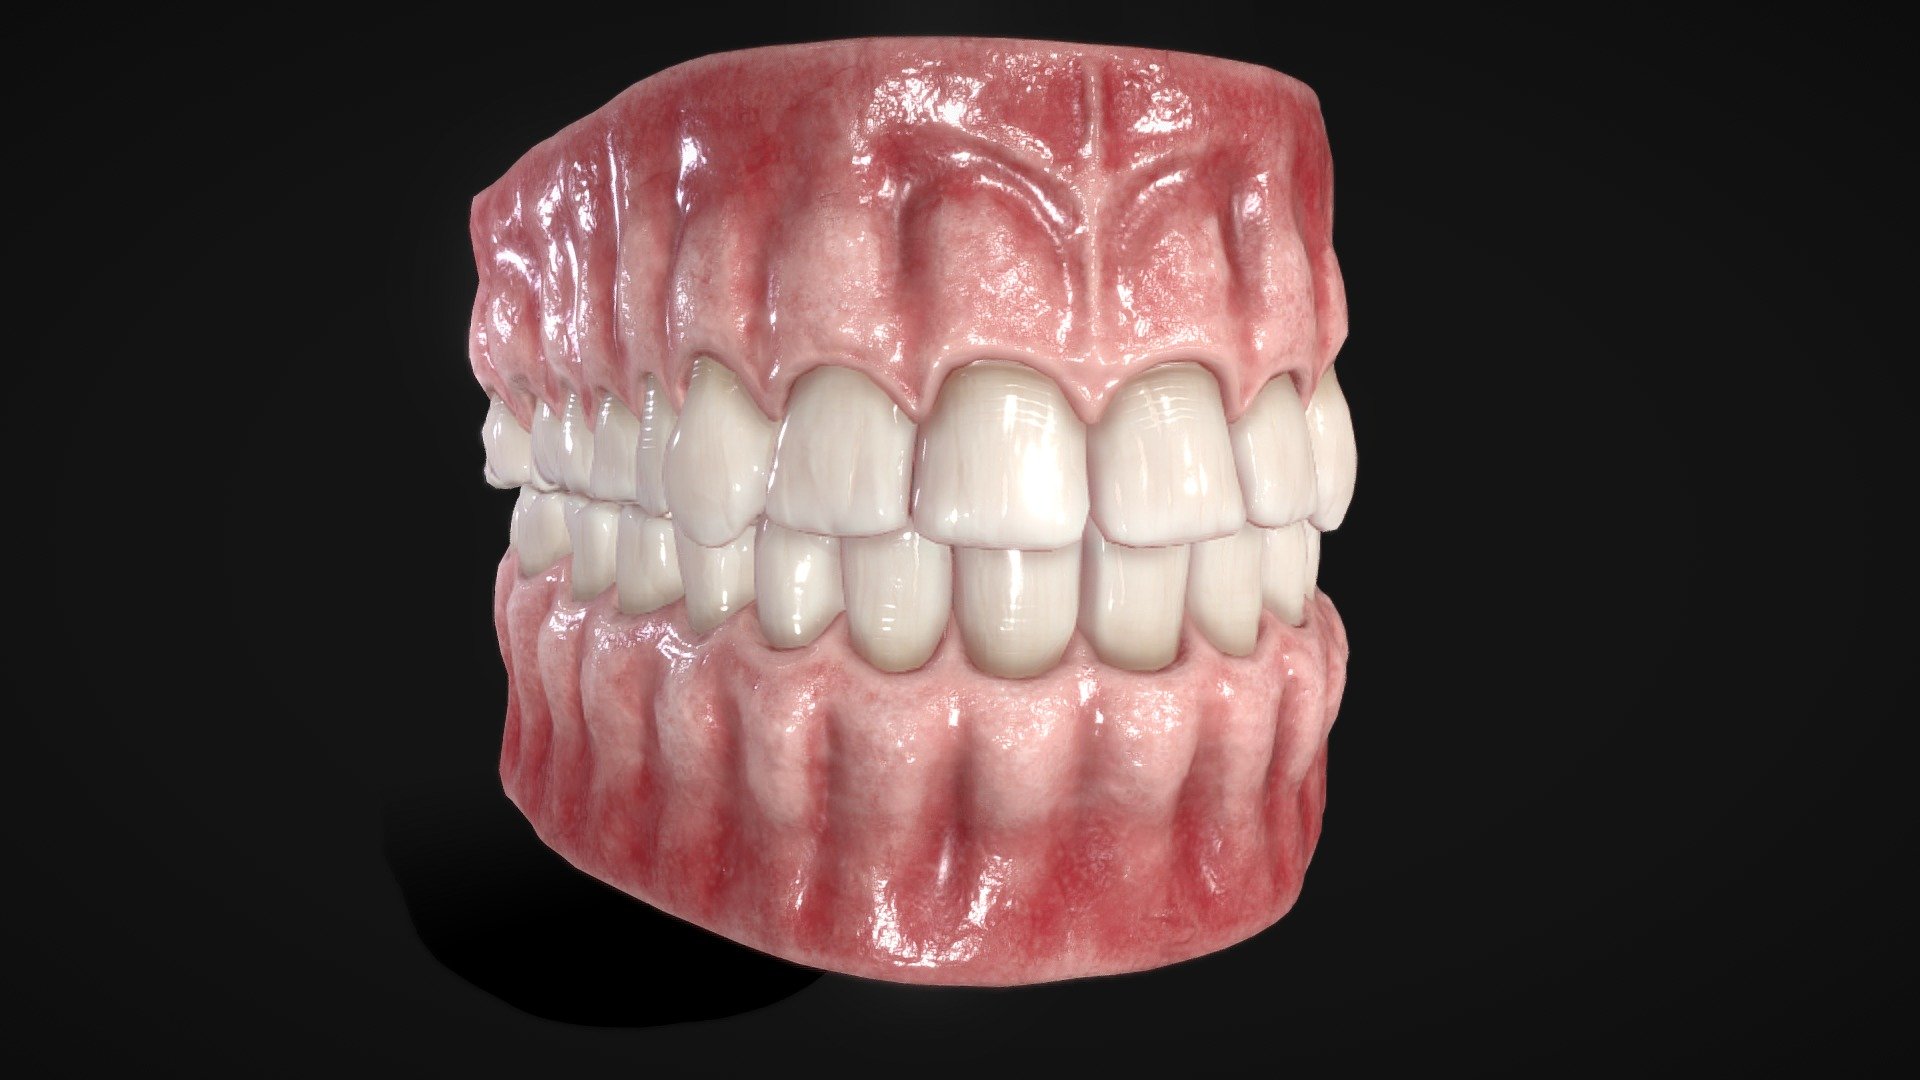 This model includes: Teeths and Gums, tongue, throat. 

2 Version

MidPoly: 32,652 tris

LowPoly: 2,815 tris

Texture sets:

MidPoly: 2 4k texture sets

LowPoly: 1 4k texture set

Textures: Base Color, AO, Roughness, Normal, SSS

Files formats: Blender(Original) - support Cycle/Evee. Maya - Standart Surface shader, not render support, PNG textures, Marmoset scene, Mesh in OBJ and FBX - Realistic Mouth - Buy Royalty Free 3D model by lambrador 3d model